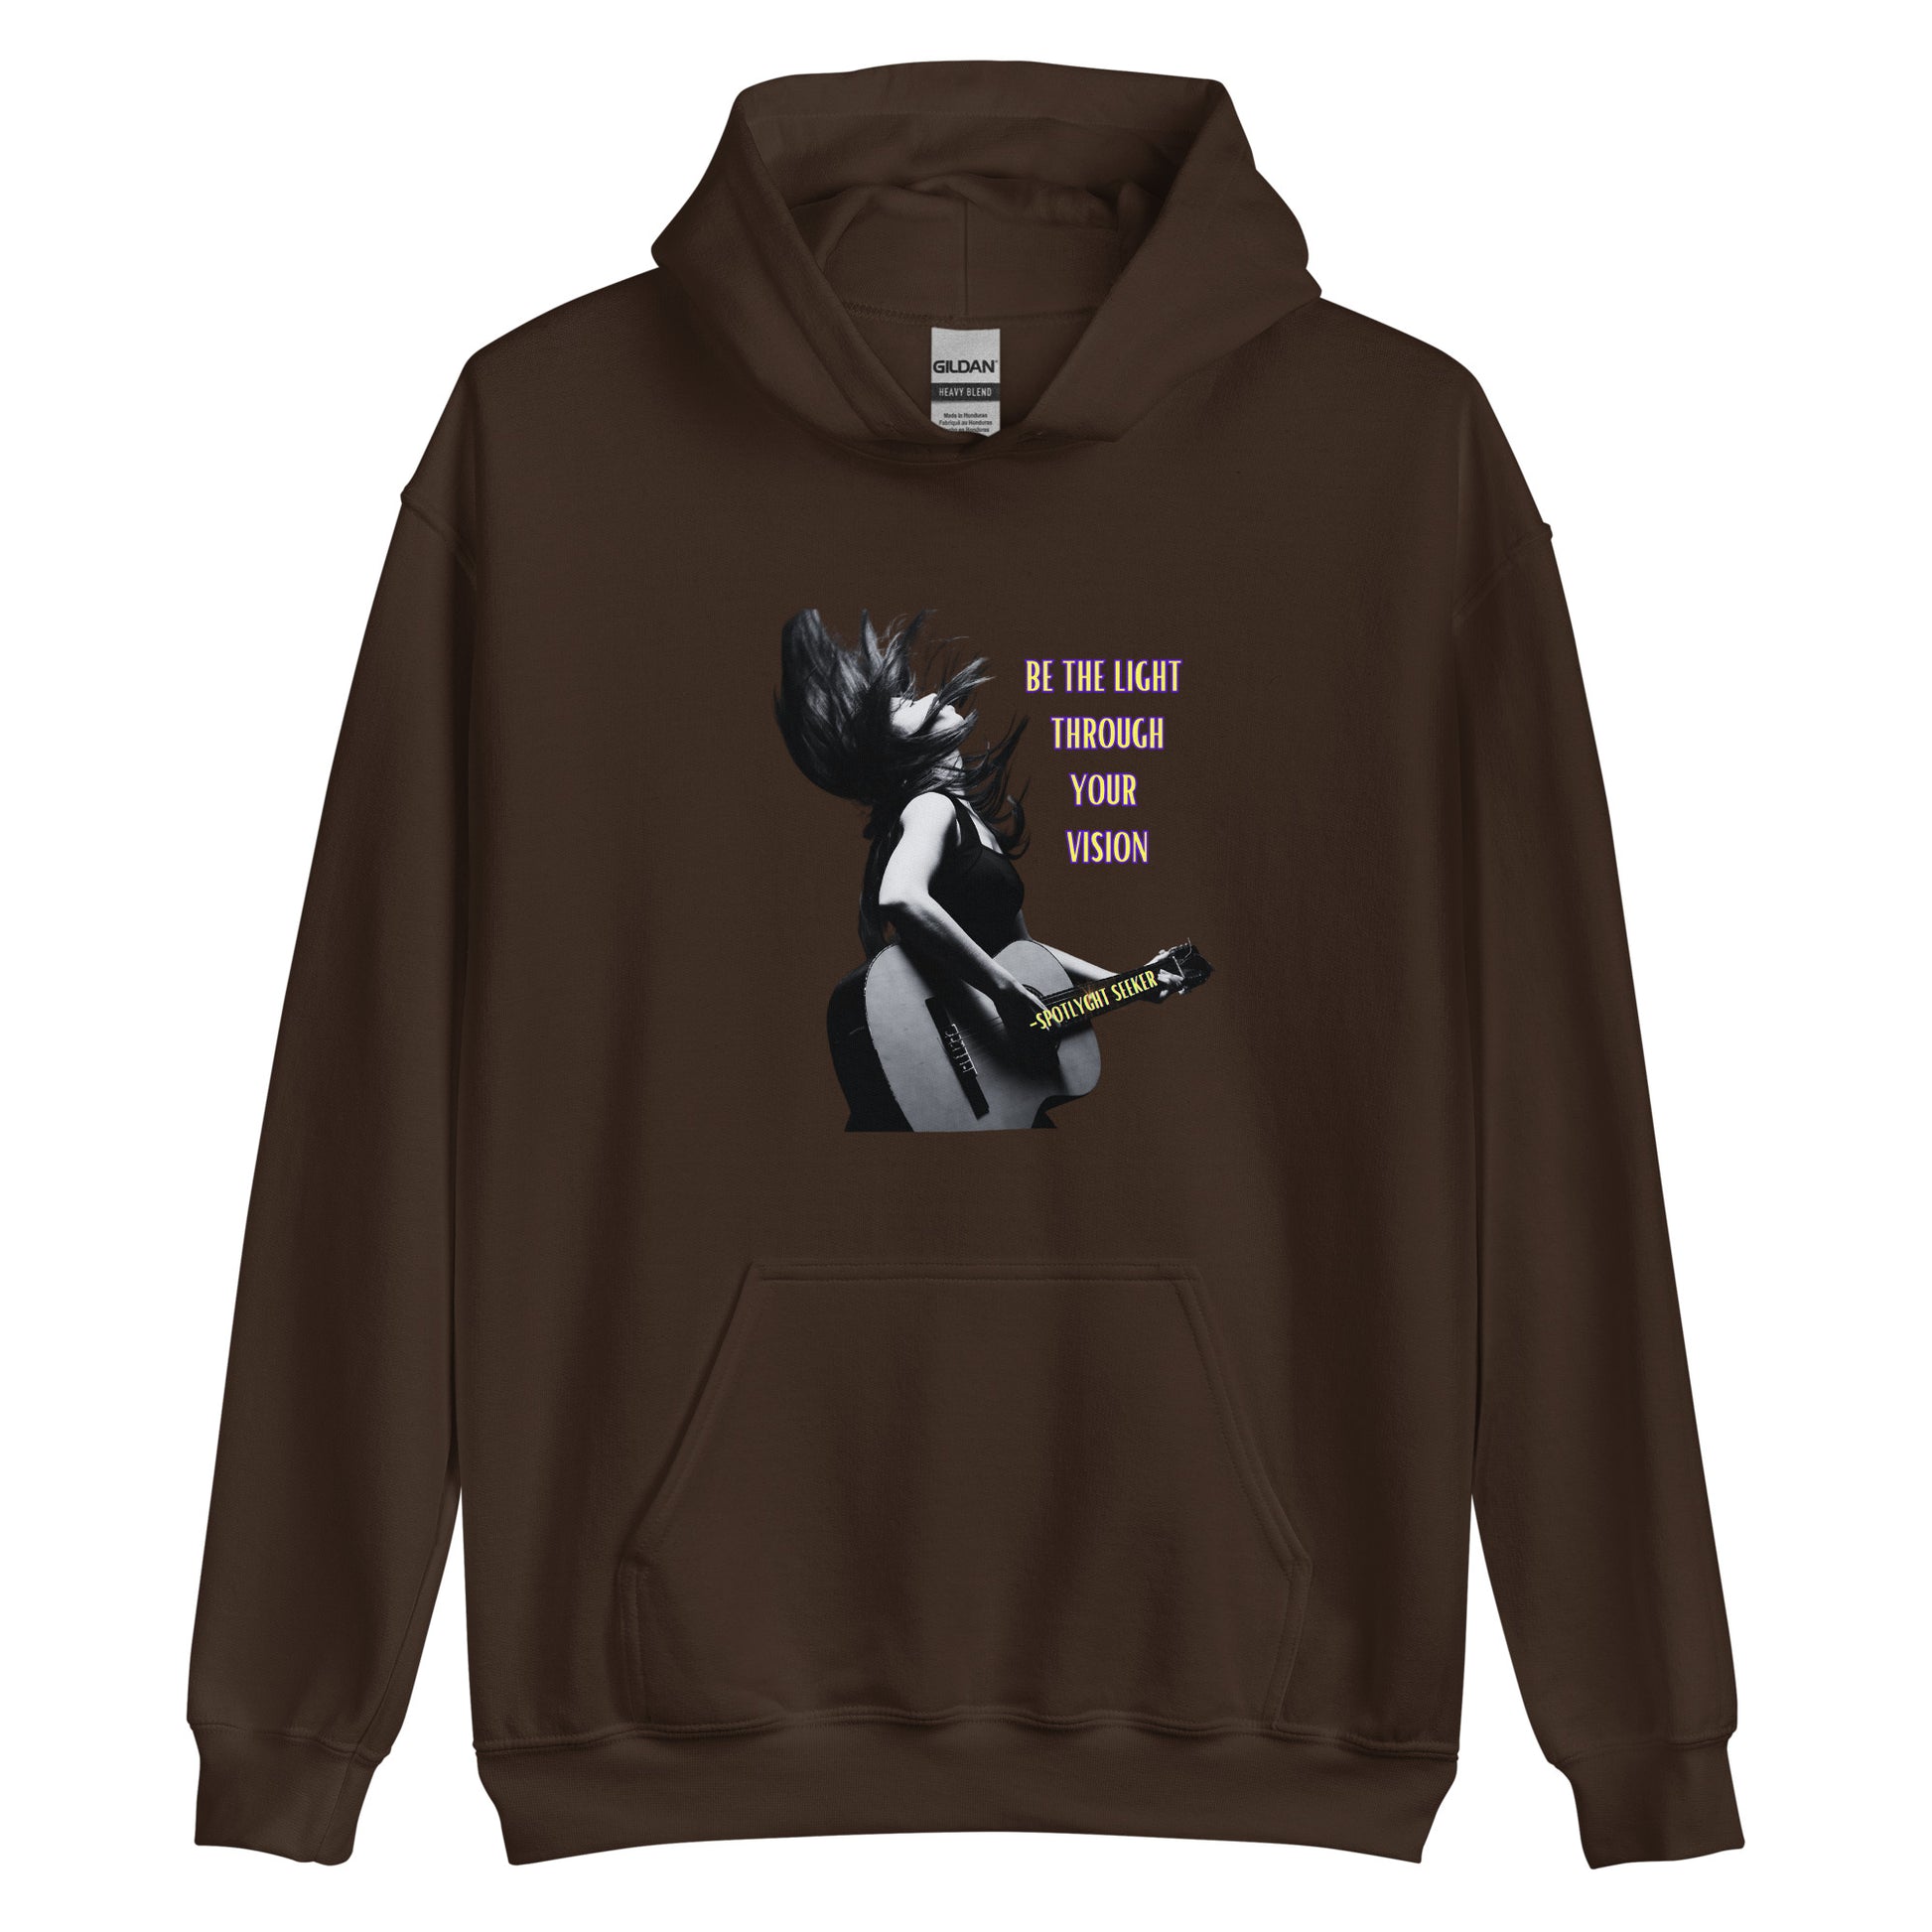 A stylish black and white Heavyweight Be the Light Unisex Hoodie displayed against a backdrop of creativity. The bold graphics symbolize authenticity, inviting artists to embrace their vision and be the light for their audience. - Chocolate Color